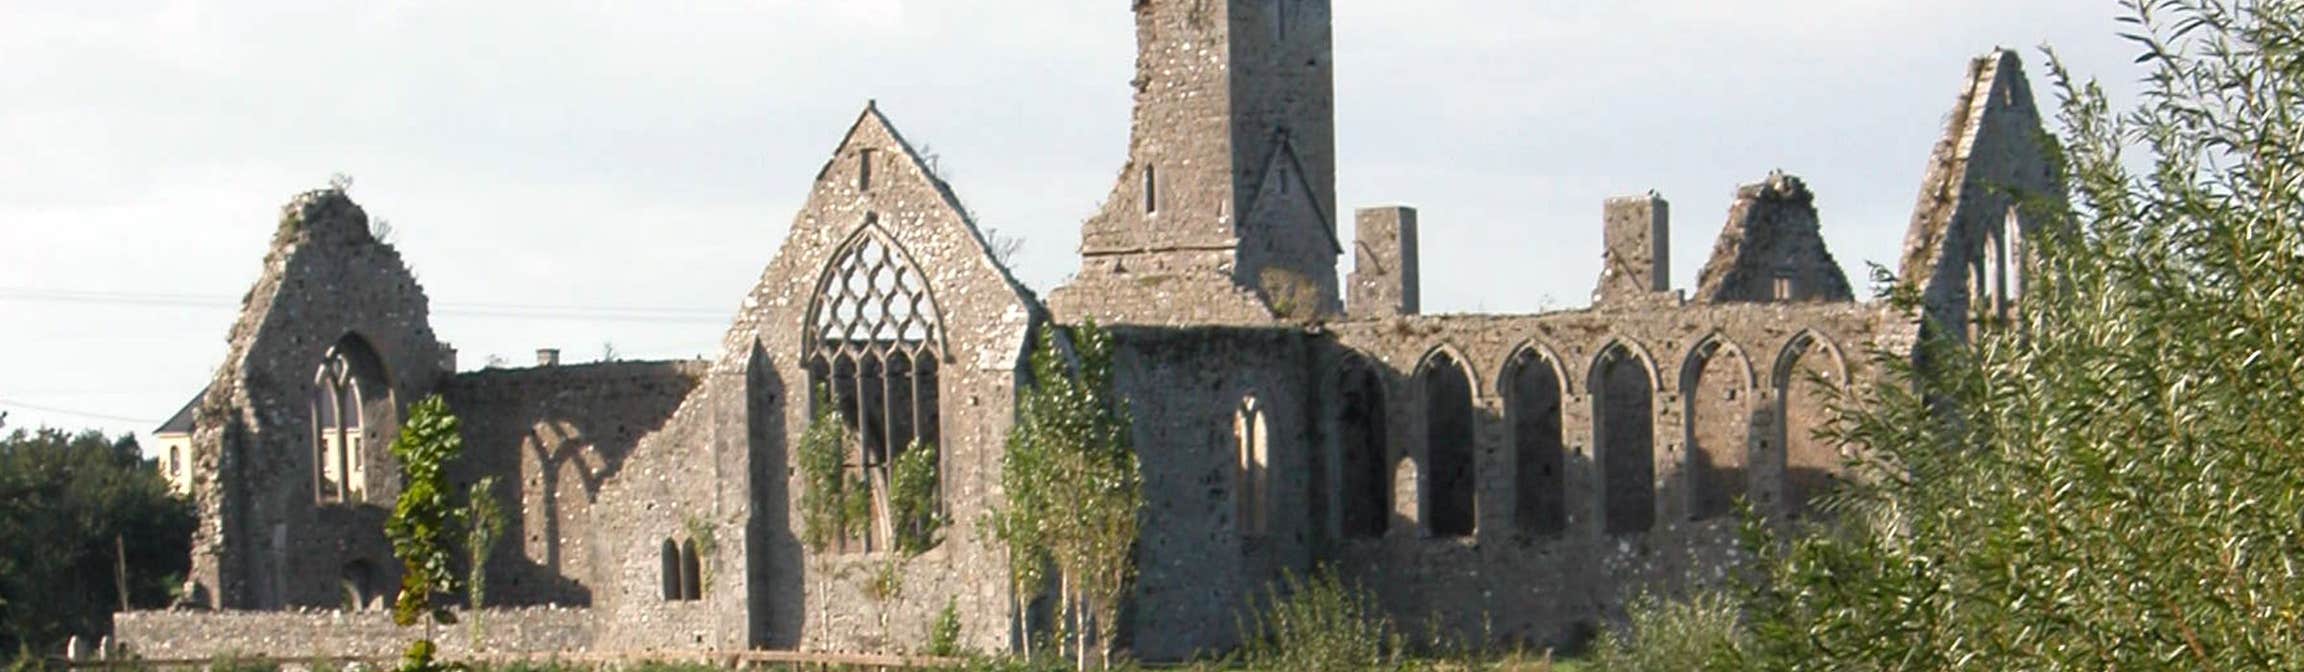 Image of Kilmallock medieval town in County Limerick